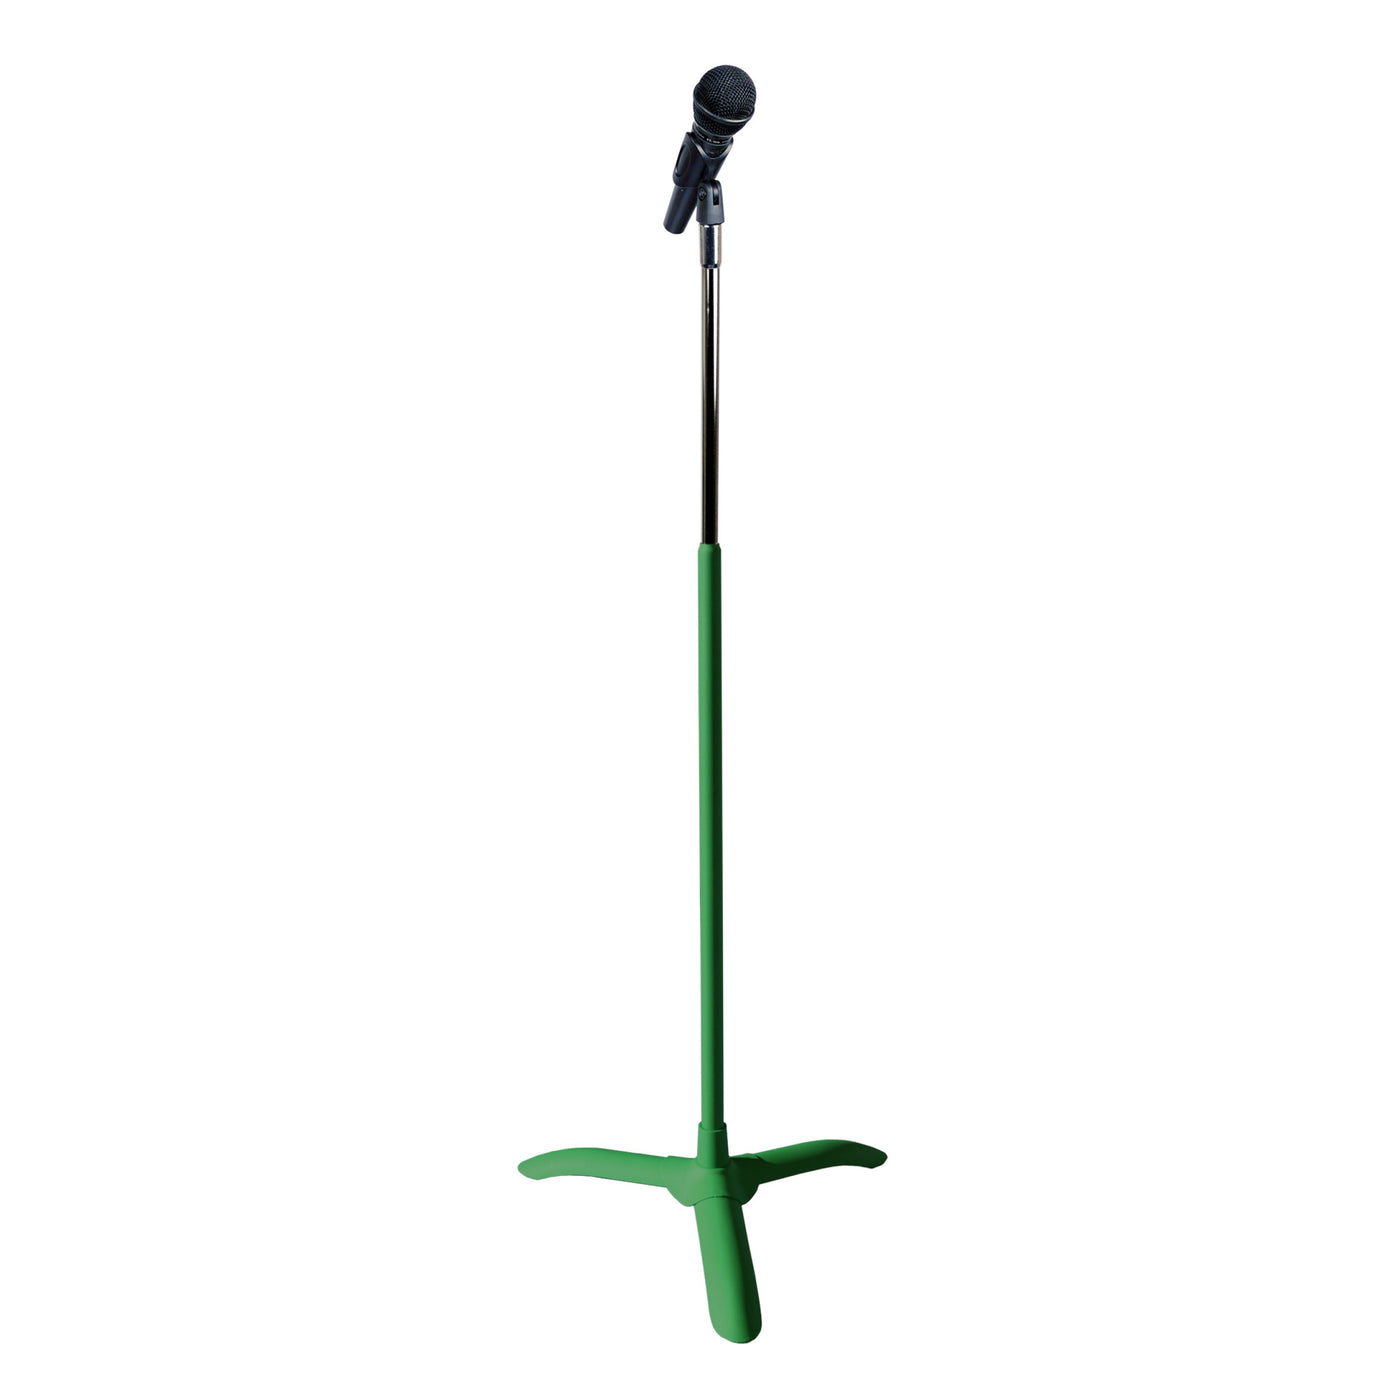 Manhasset Adjustable Height Universal Chorale Microphone Stand, Textured Green (3016MGN)